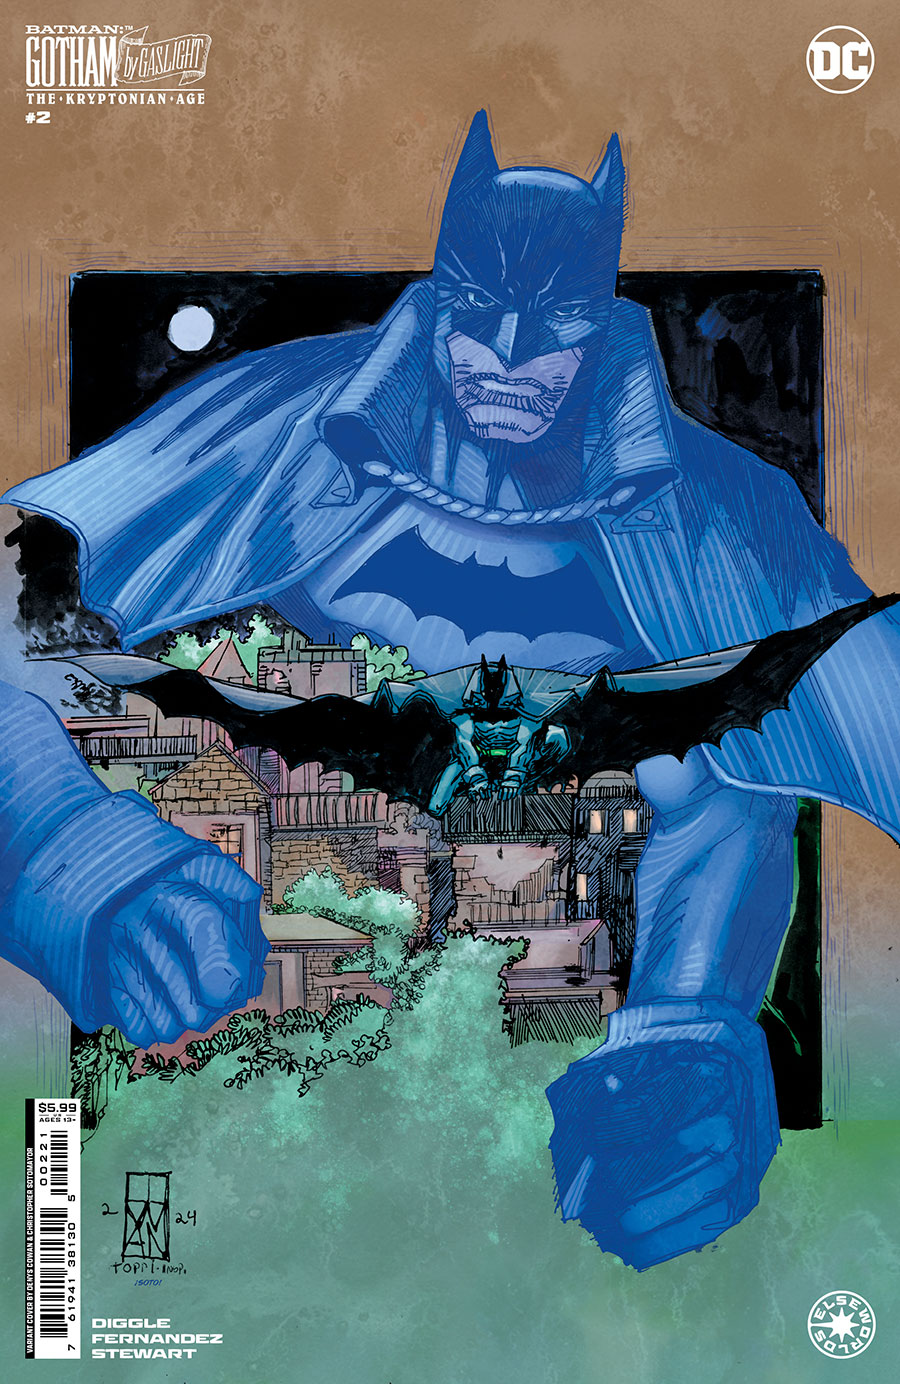 Batman Gotham By Gaslight The Kryptonian Age #2 Cover C Variant Denys Cowan Card Stock Cover